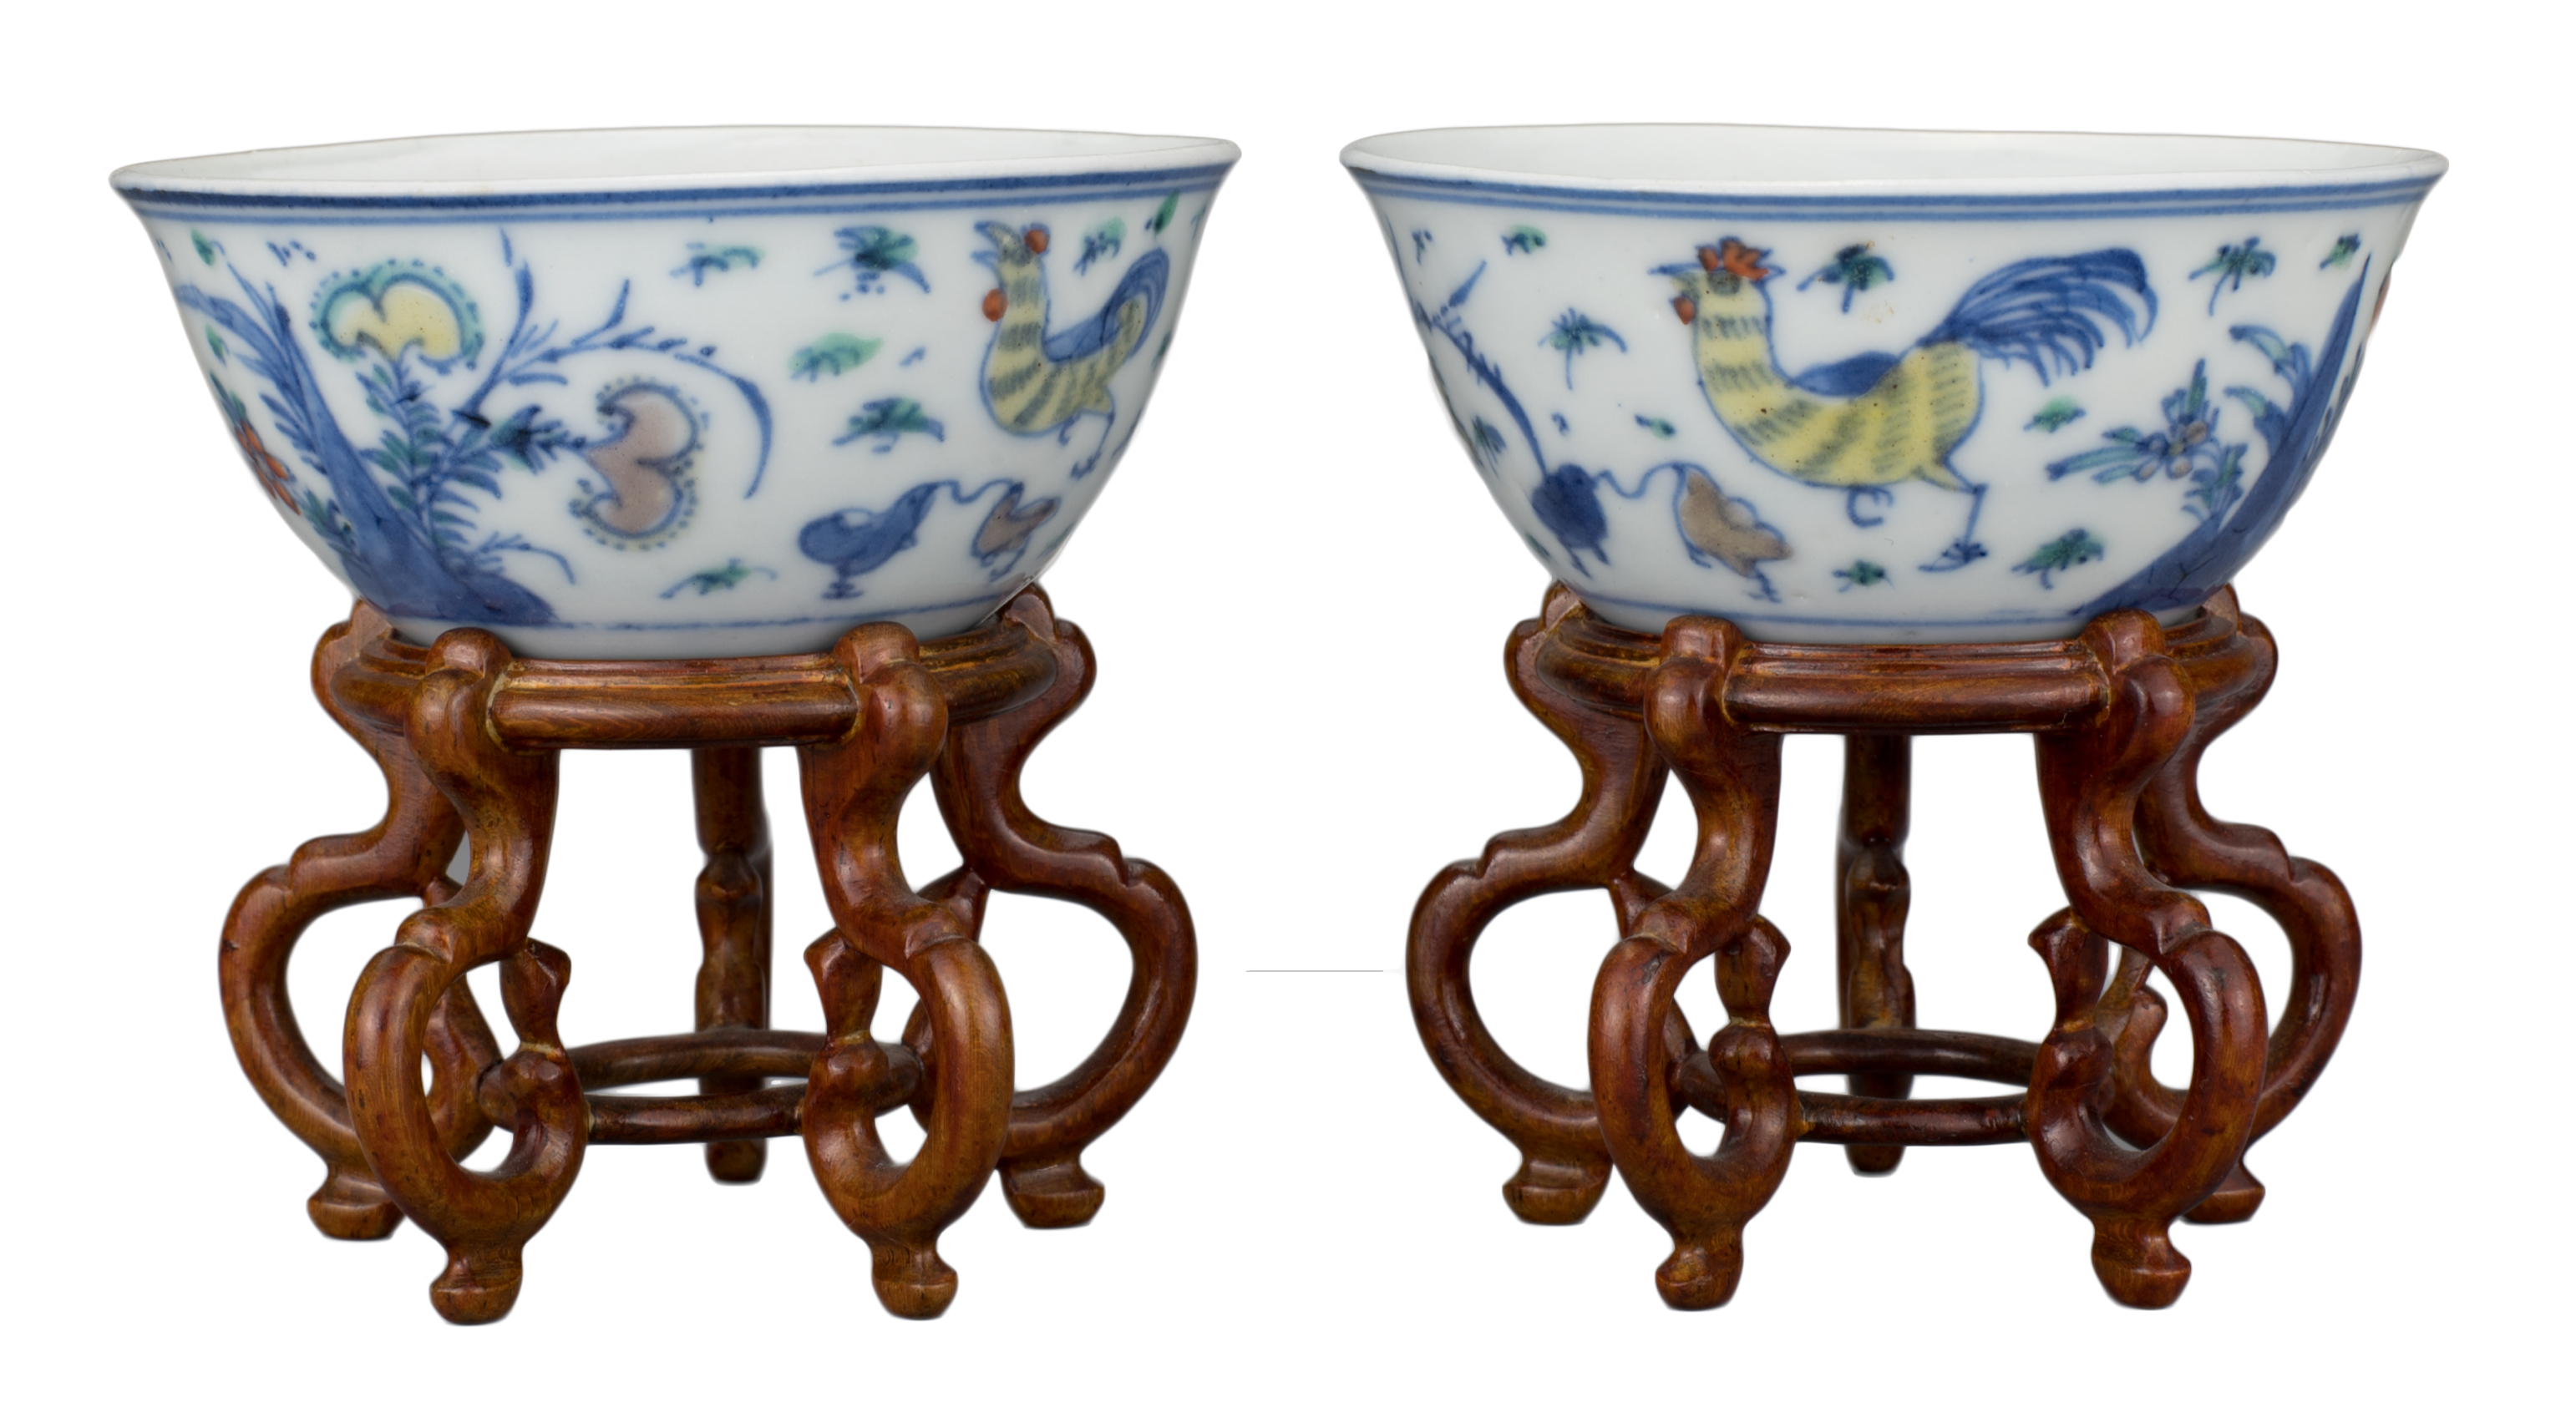 PAIR OF CHINESE DOUCAI PORCELAIN ‘CHICKEN’ CUPS, KANGXI PERIOD, 18th CENTURY